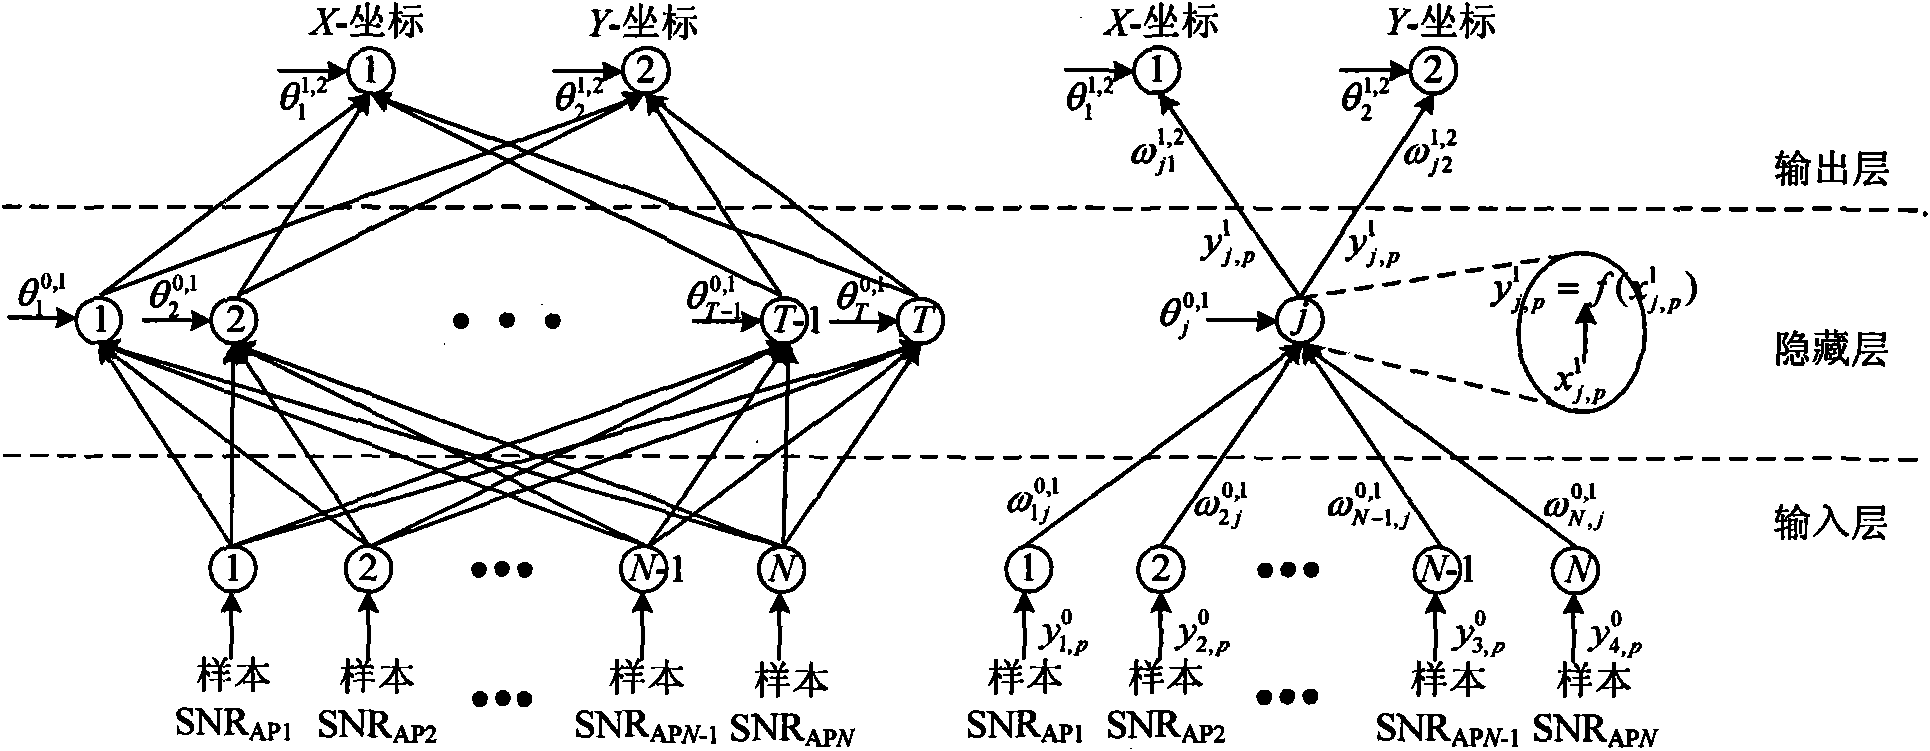 Method for optimizing WLAN (Wireless Local Area Network) indoor ANN (Artificial Neural Network) positioning based on FCM (fuzzy C-mean) and least-squares curve surface fitting methods